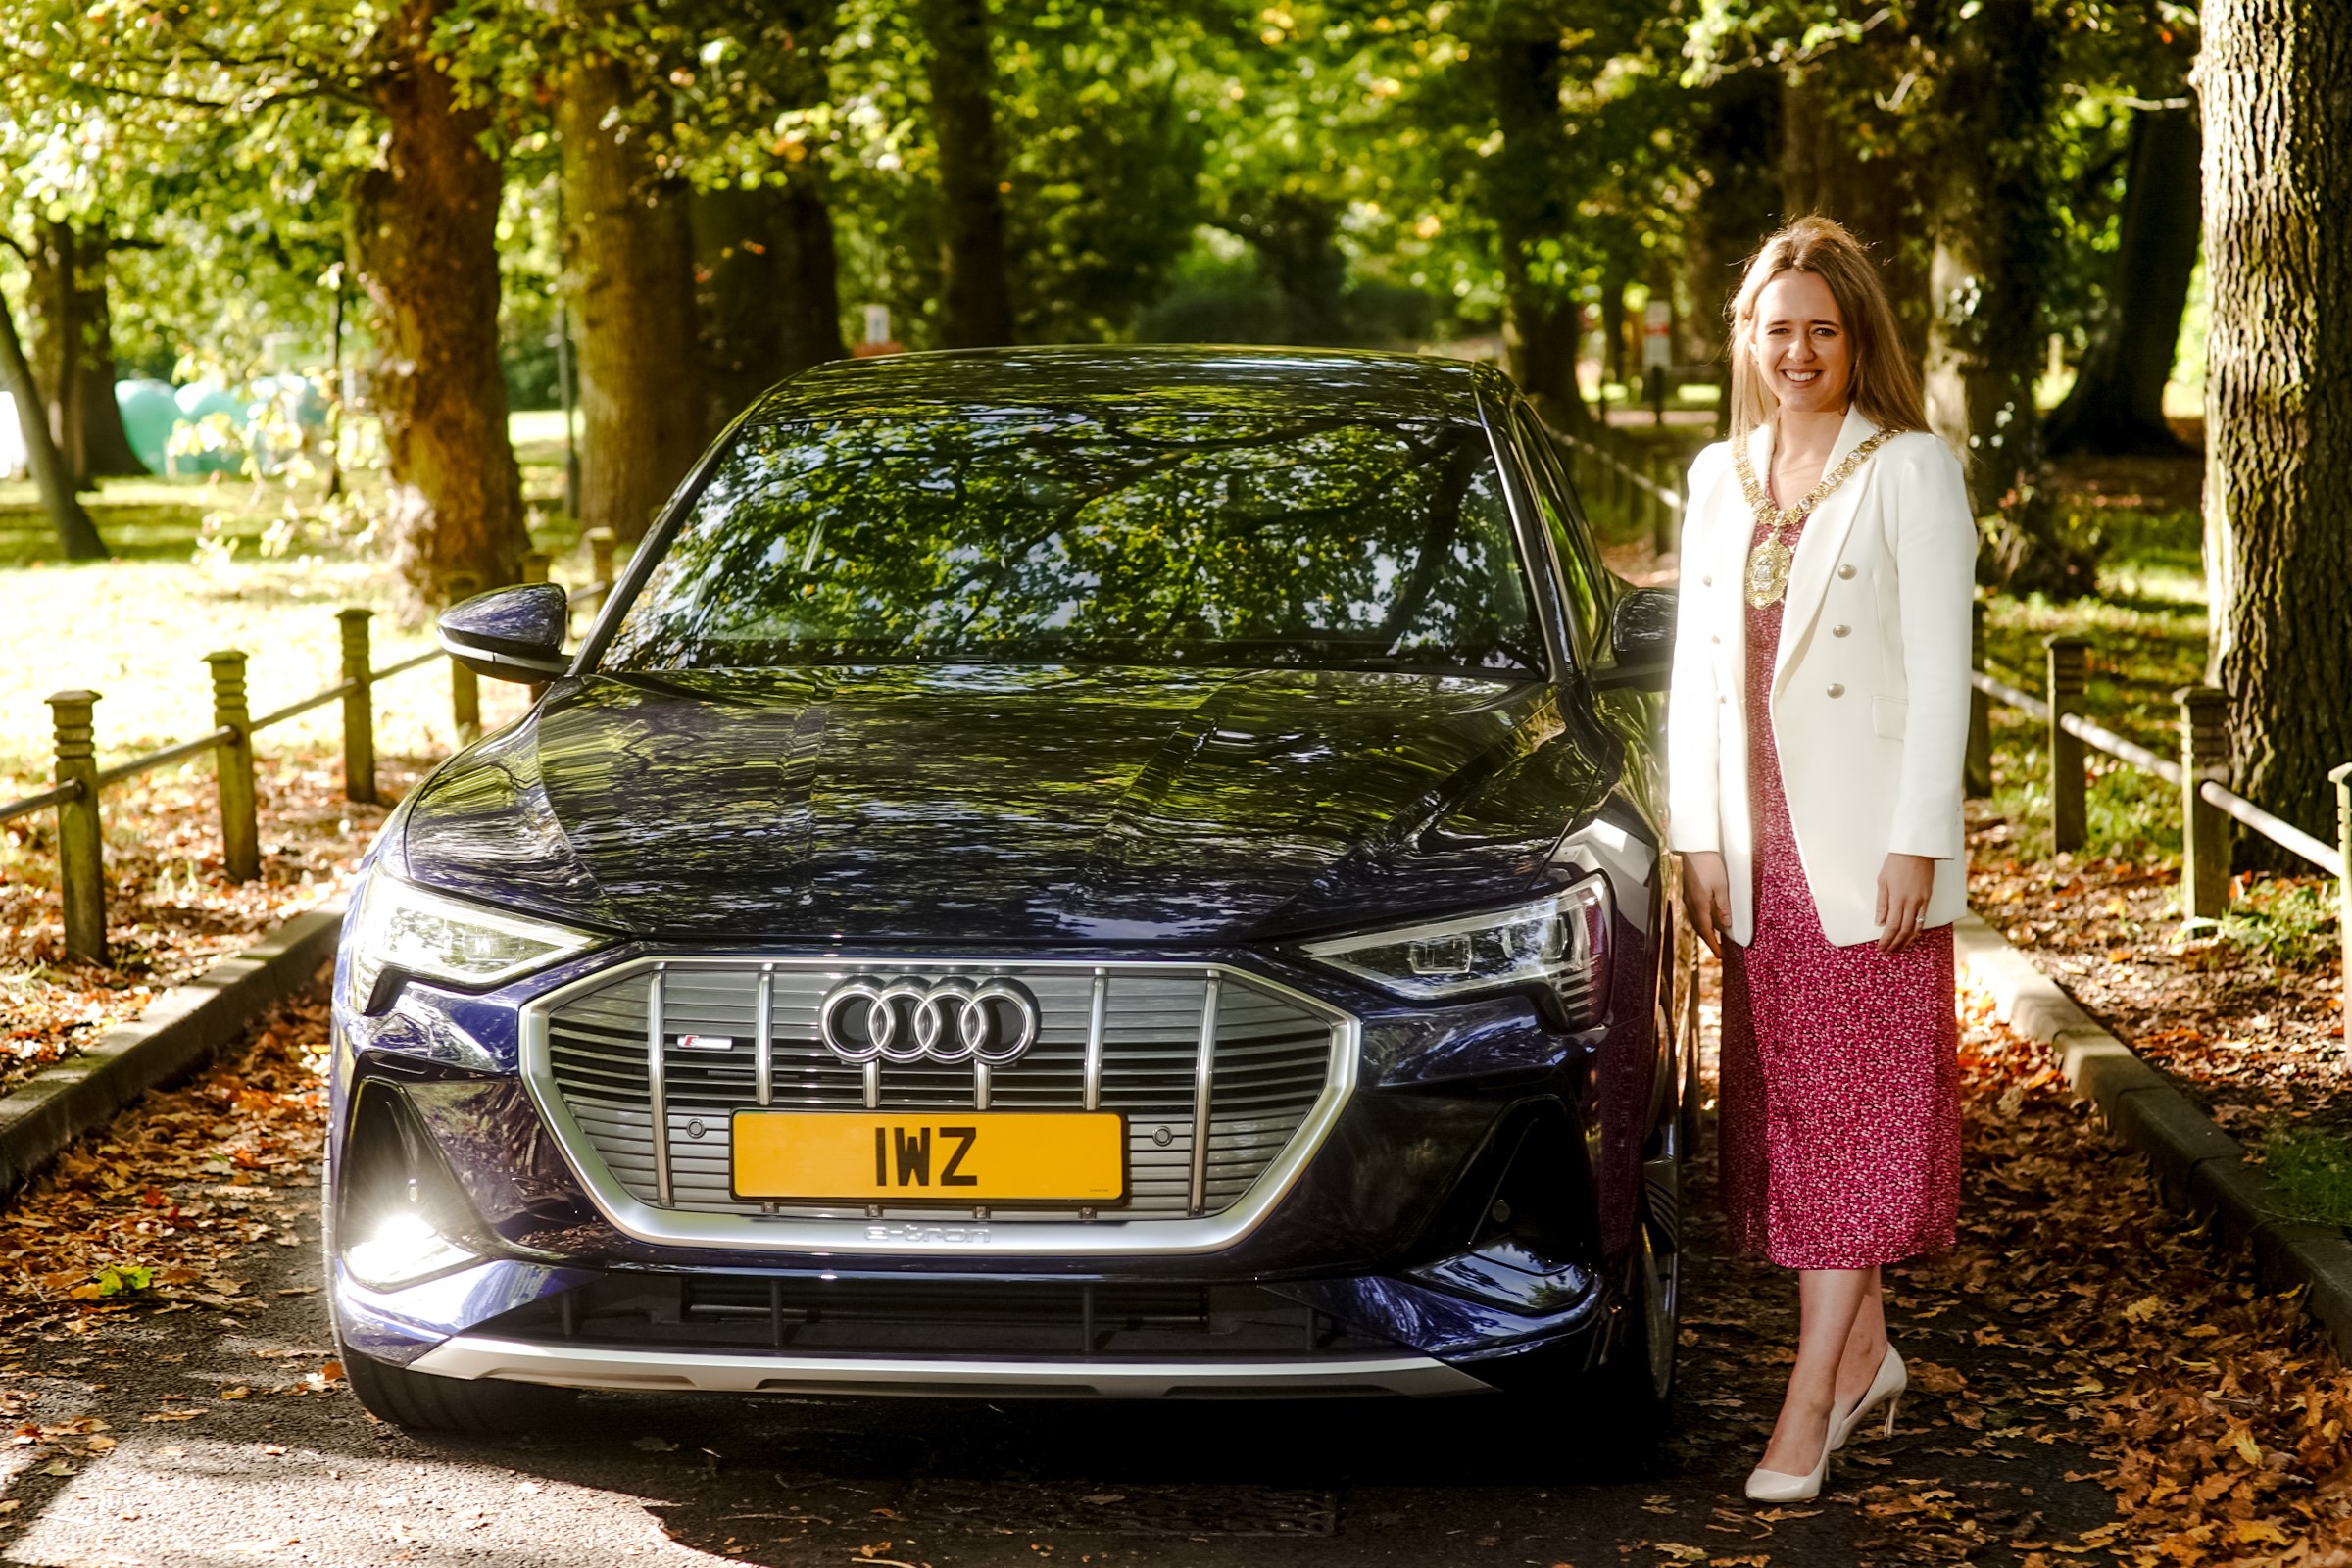 Belfast Lord Mayor’s official car goes electric